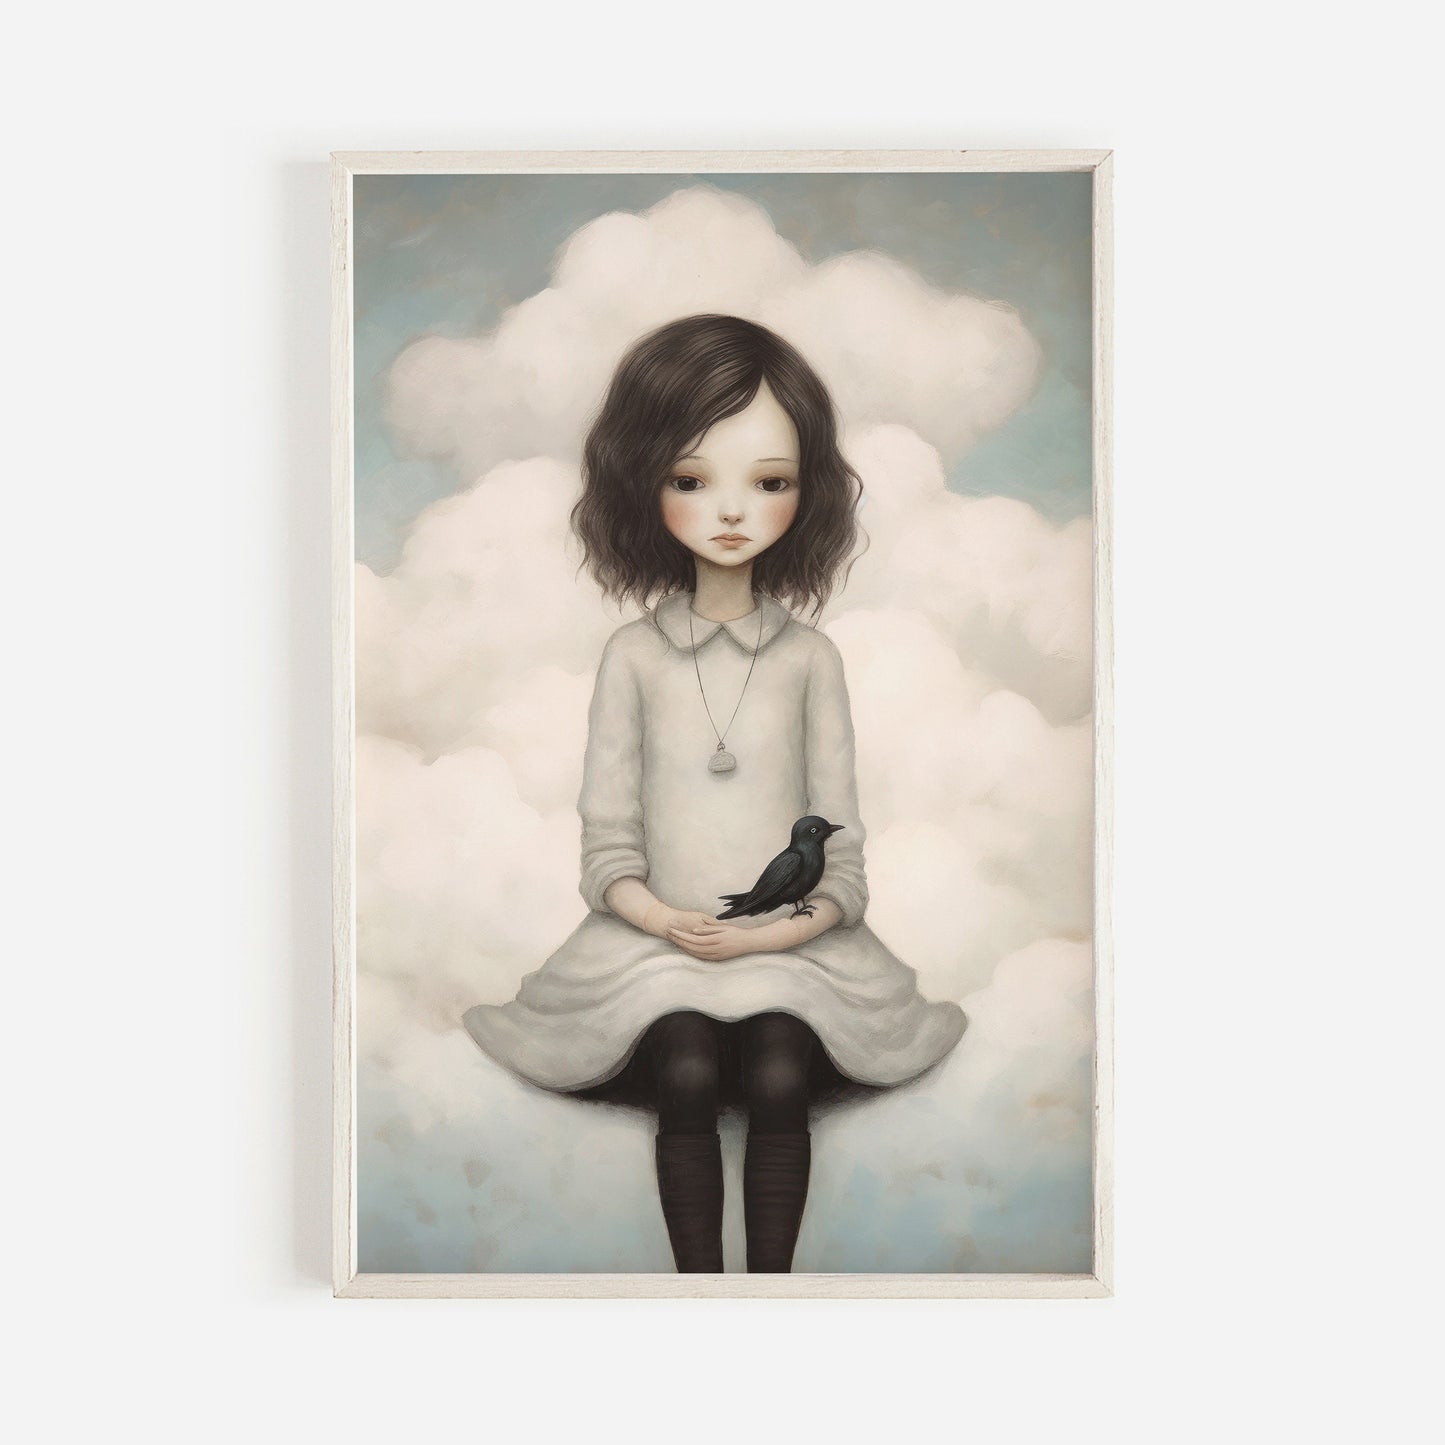 Vintage Wall Art, Little Girl on Cloud with Black Bird, Digital Printable Art, Unique & Quirky Nursery or Girl's Room Decor